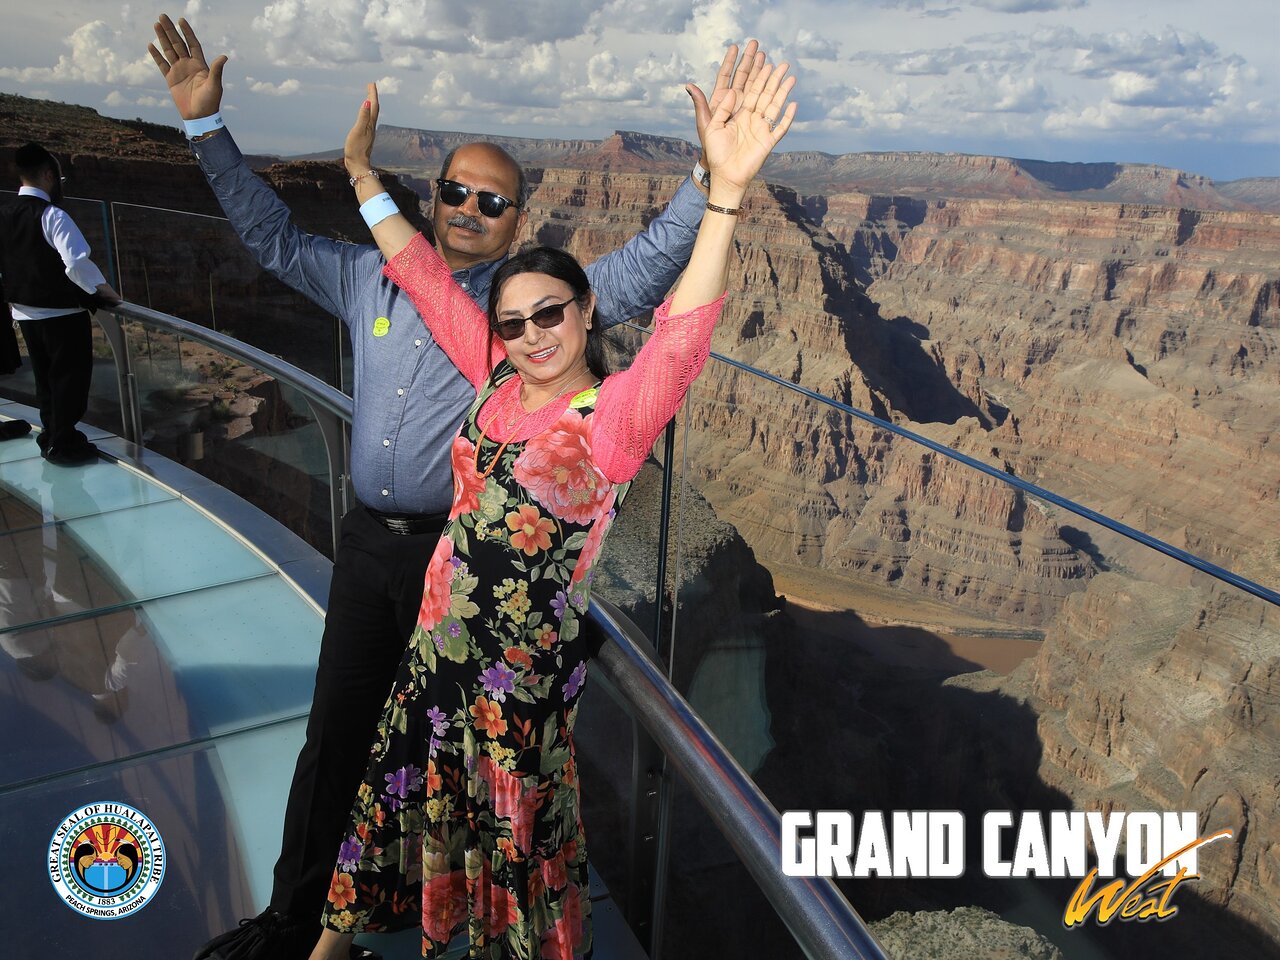 Grand Canyon West Rim Flightseeing Tour with Optional Heli, Boat &#038; Skywalk